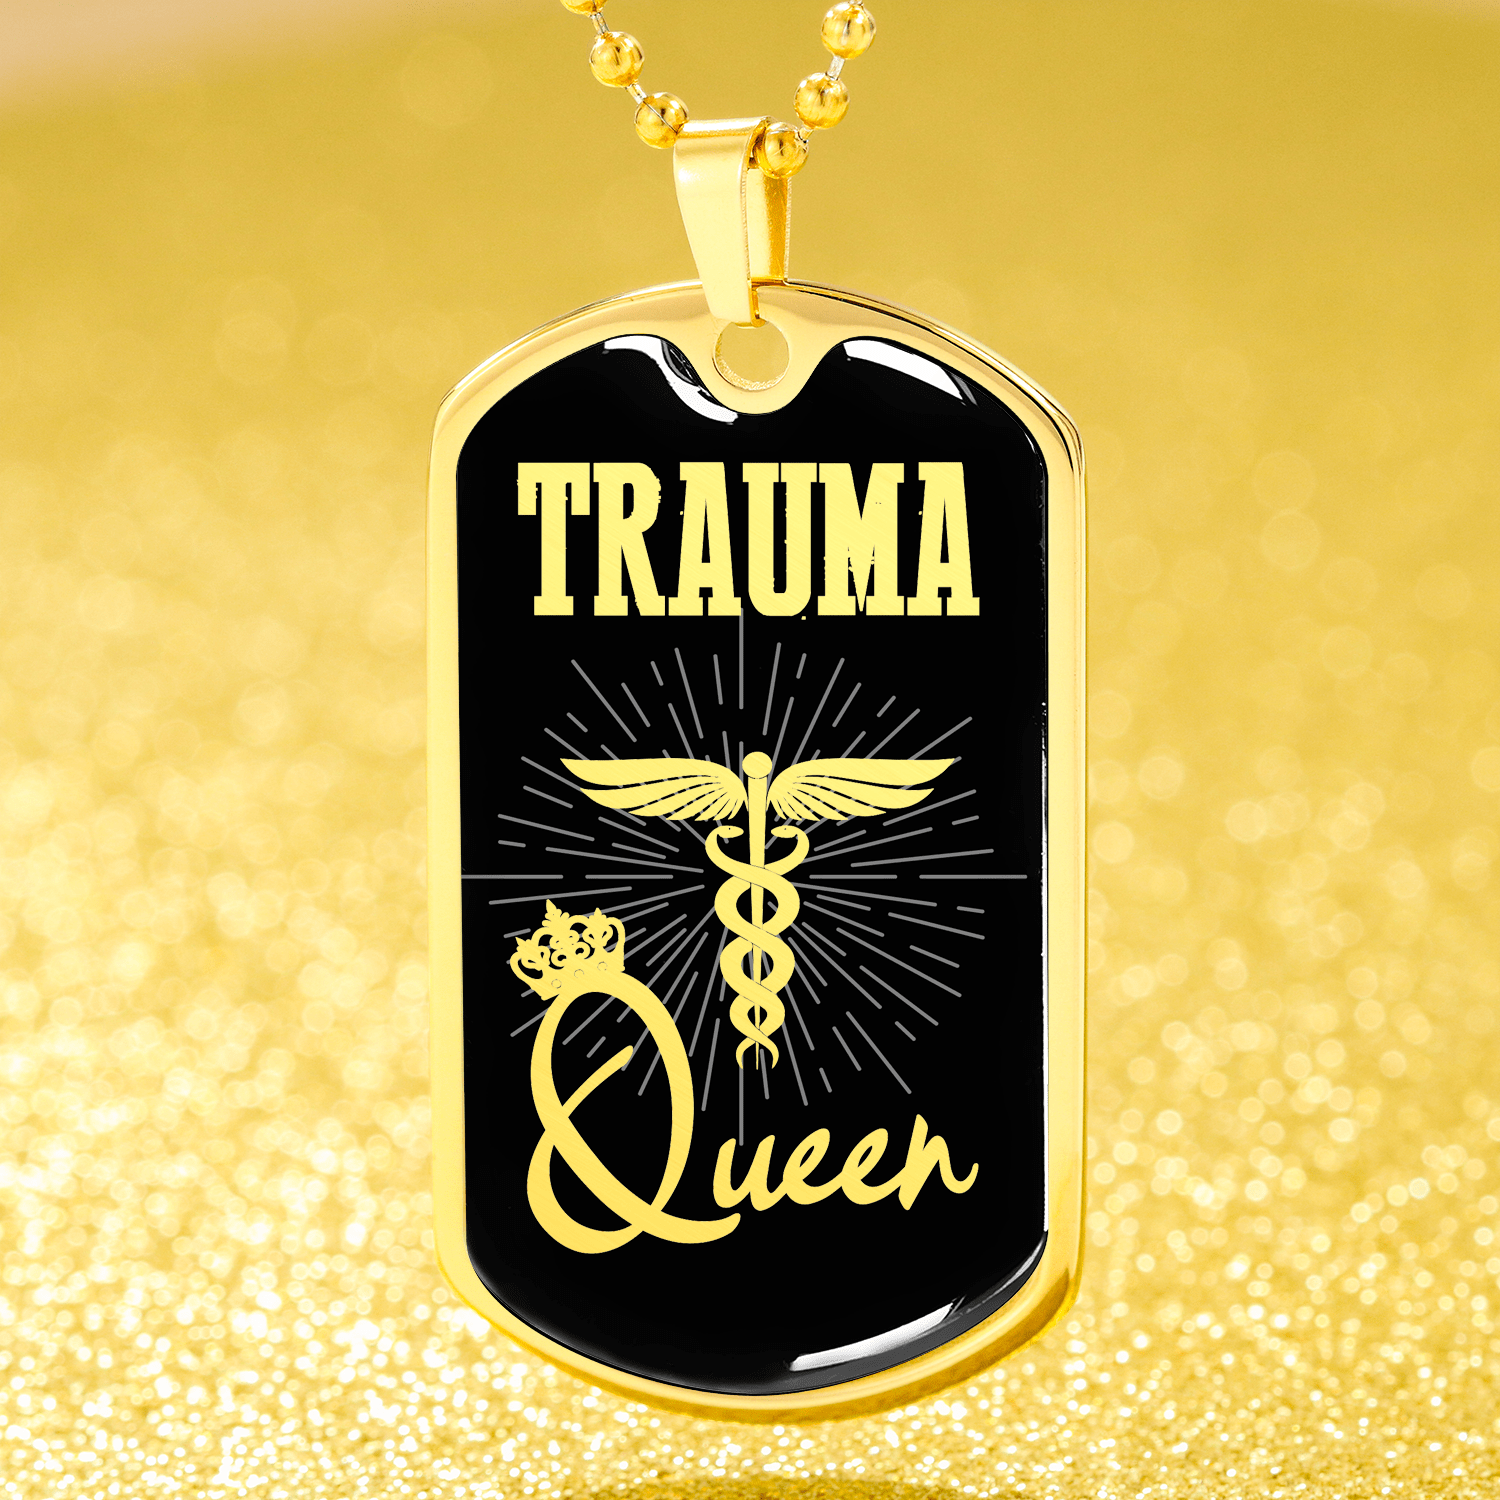 Trauma Queen Paramedic Nurse Necklace Stainless Steel or 18k Gold Dog Tag W 24" - Express Your Love Gifts